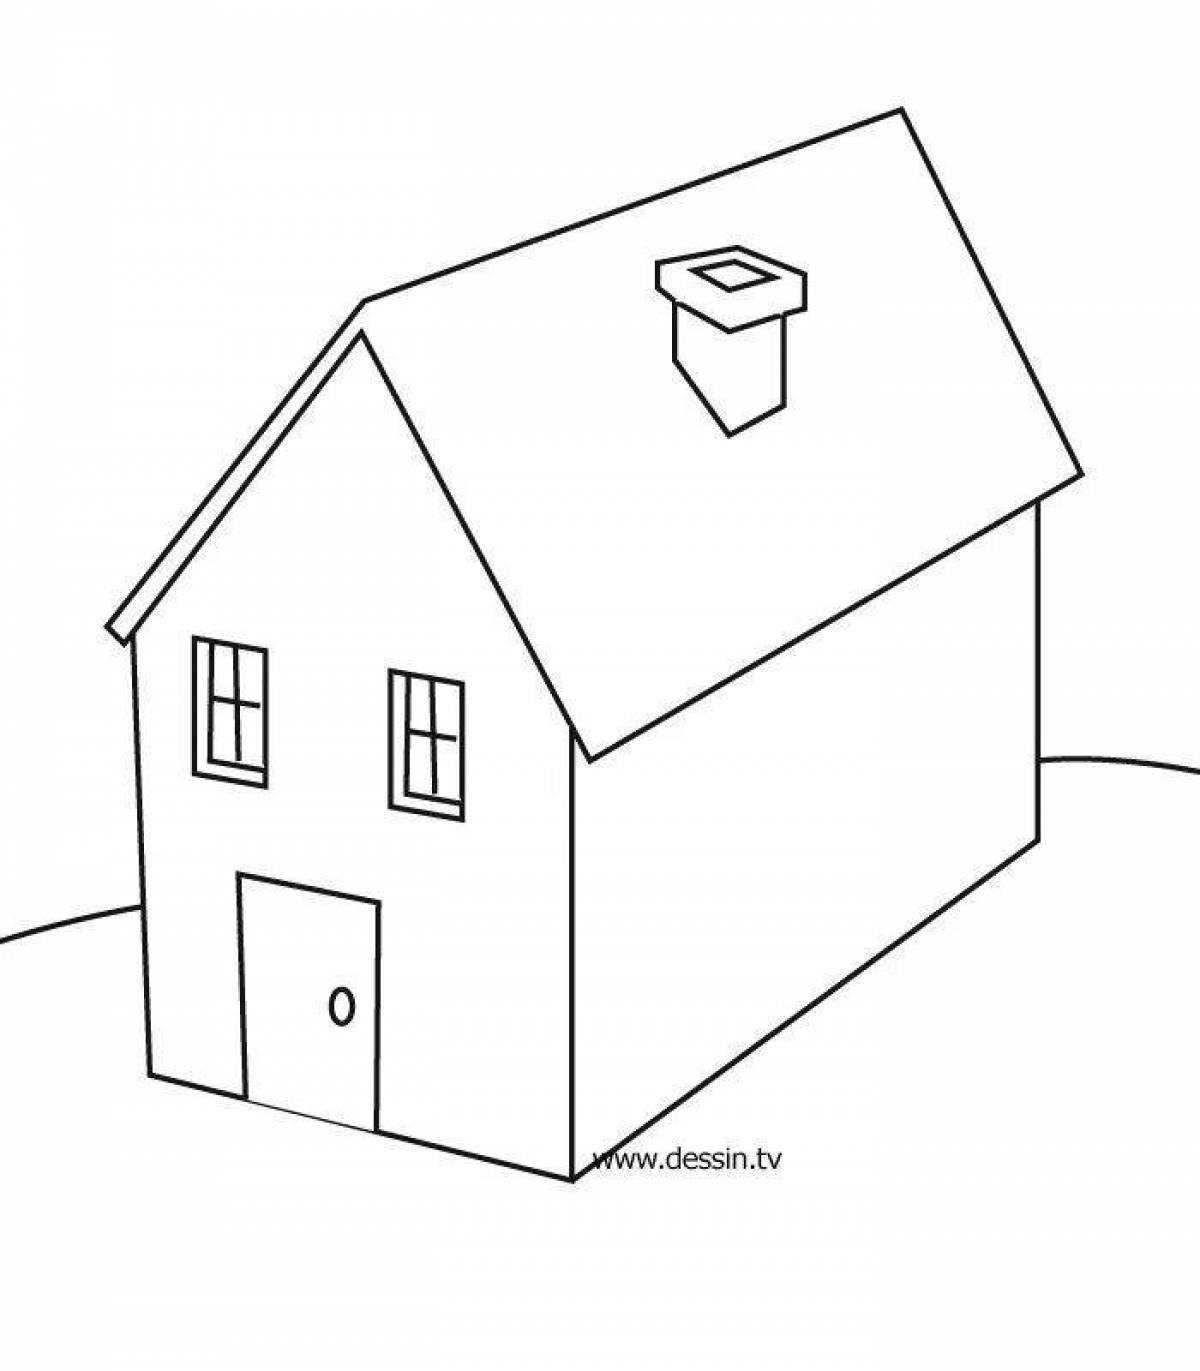 Coloring book cheerful simple house